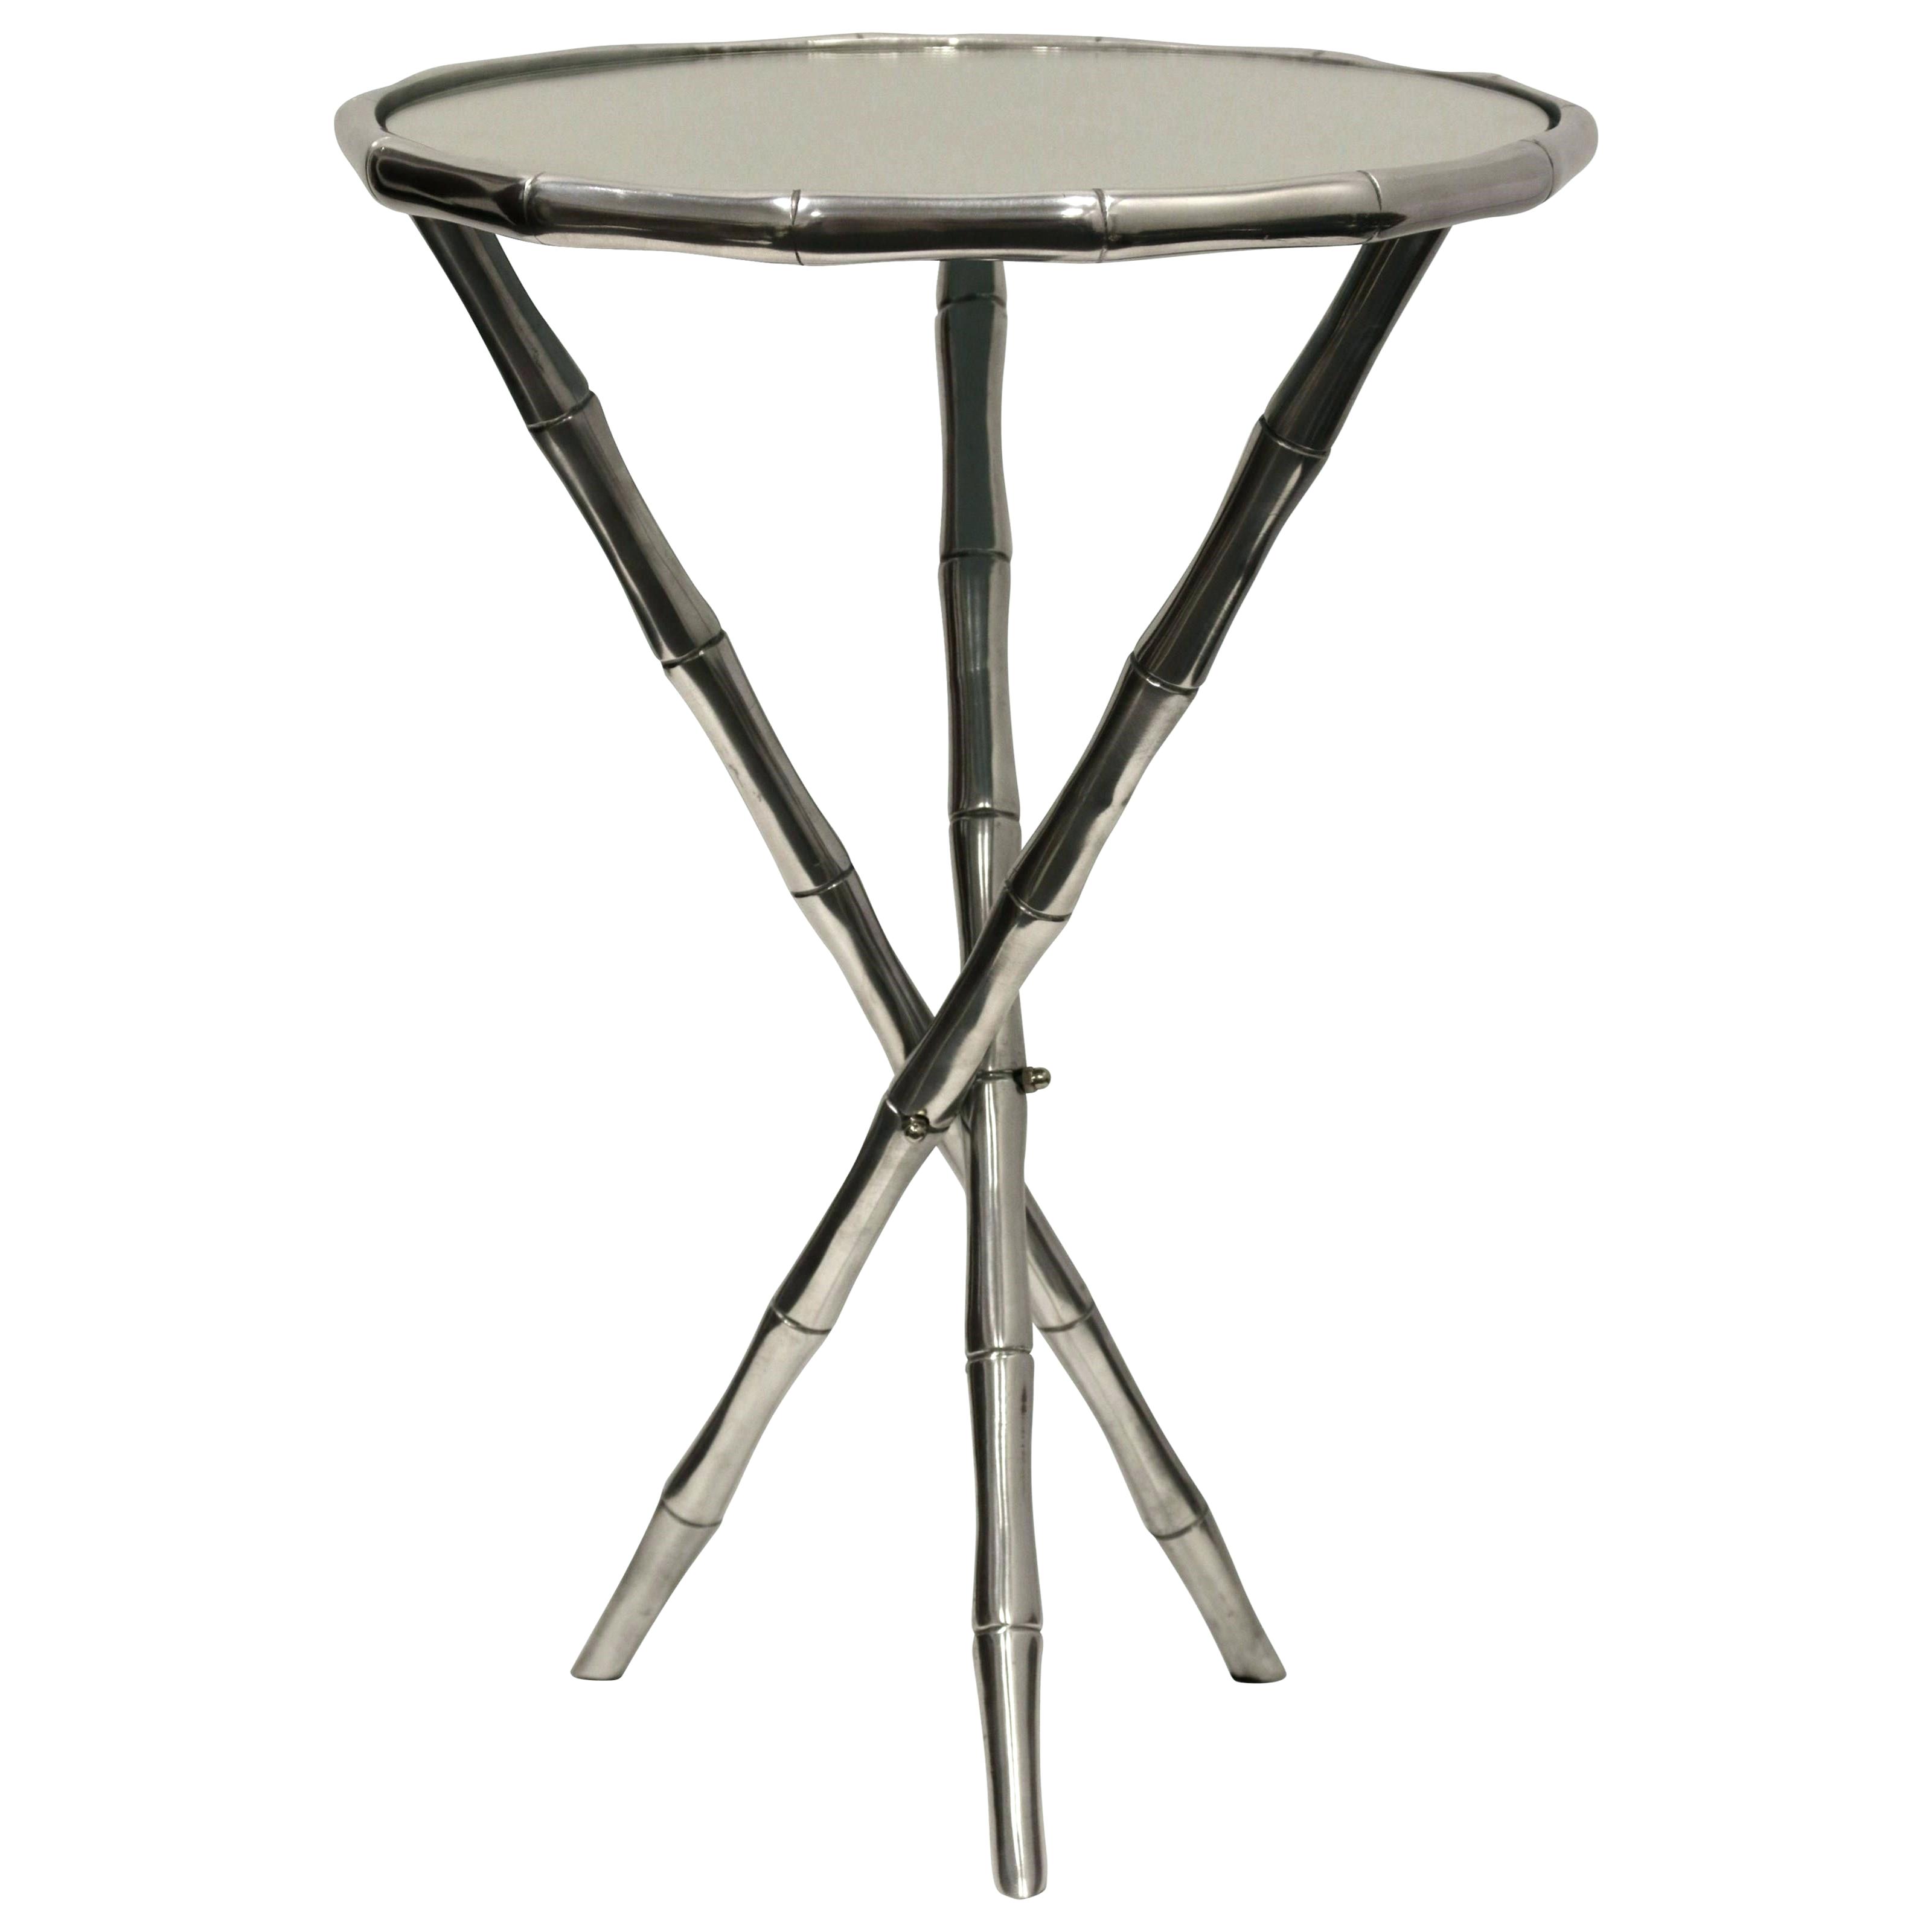 target metal patio accent table outdoor drum with drawers round corranade threshold occasional tables furniture kitchen marvellous roun full size large nesting west elm chairs